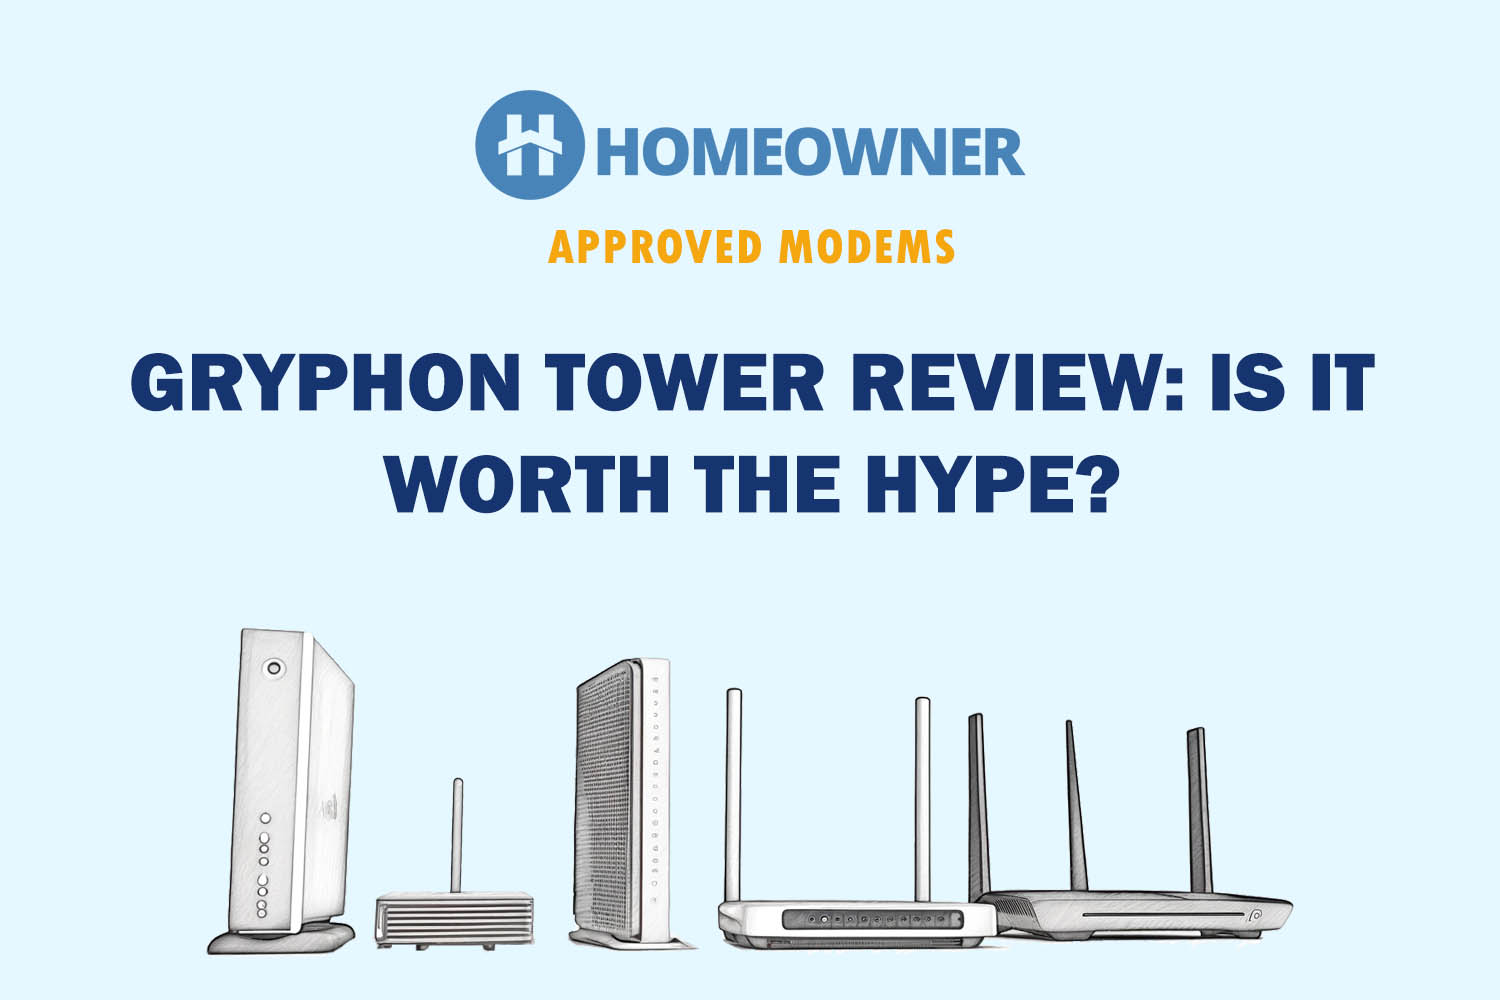 Gryphon Tower Review